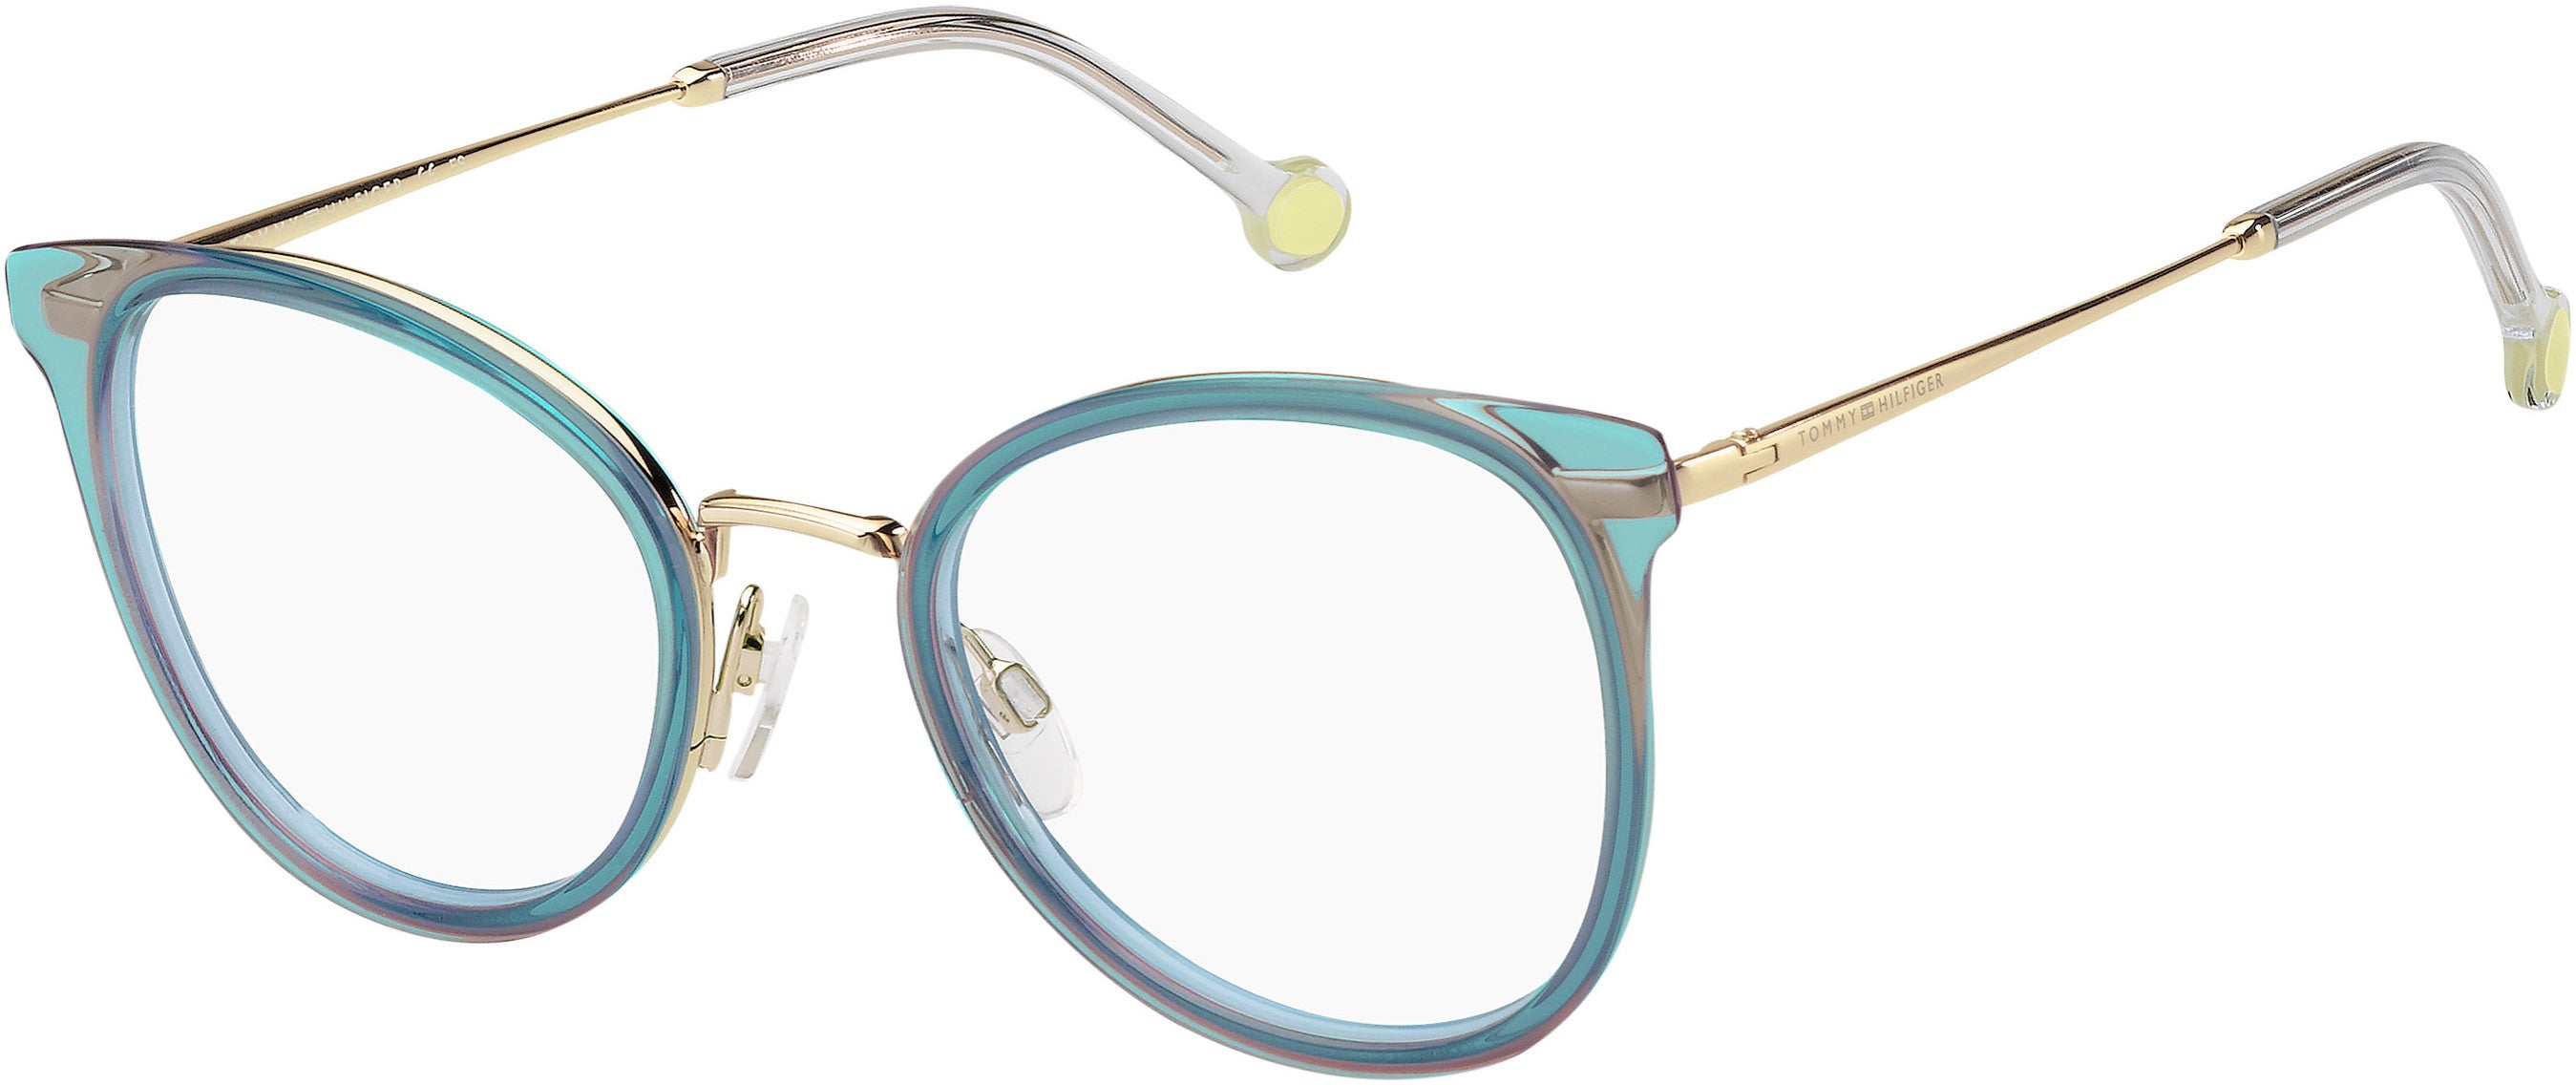 Tommy Hilfiger T. Hilfiger 1837 Cat Eye/butterfly Eyeglasses 0AGS-0AGS  Azure Blue (00 Demo Lens)